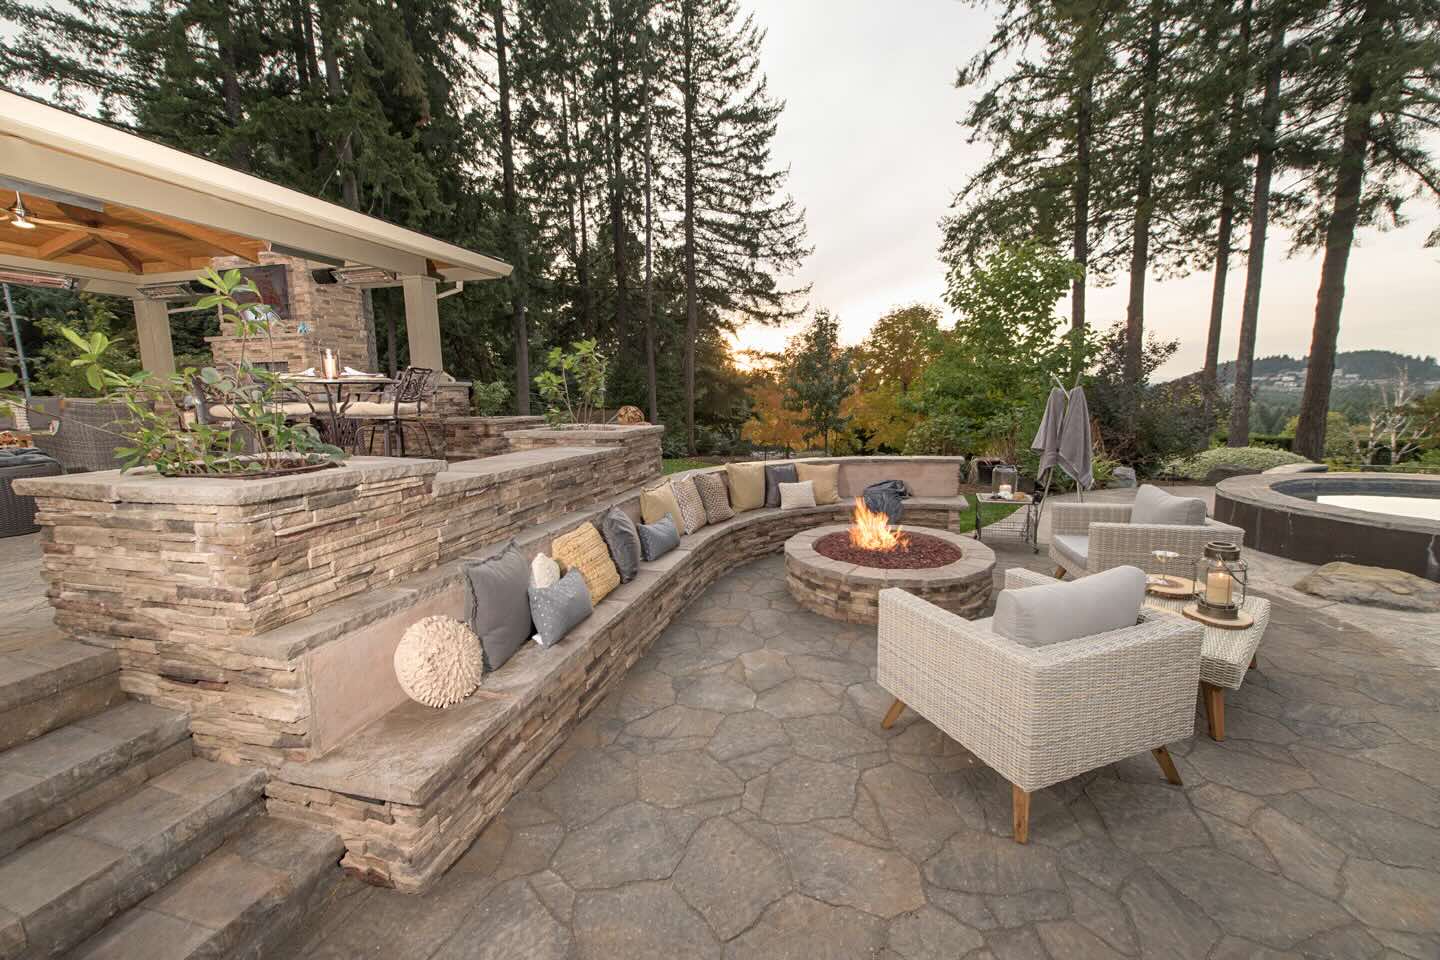 How To Build A Fire Pit On A Sloped Yard